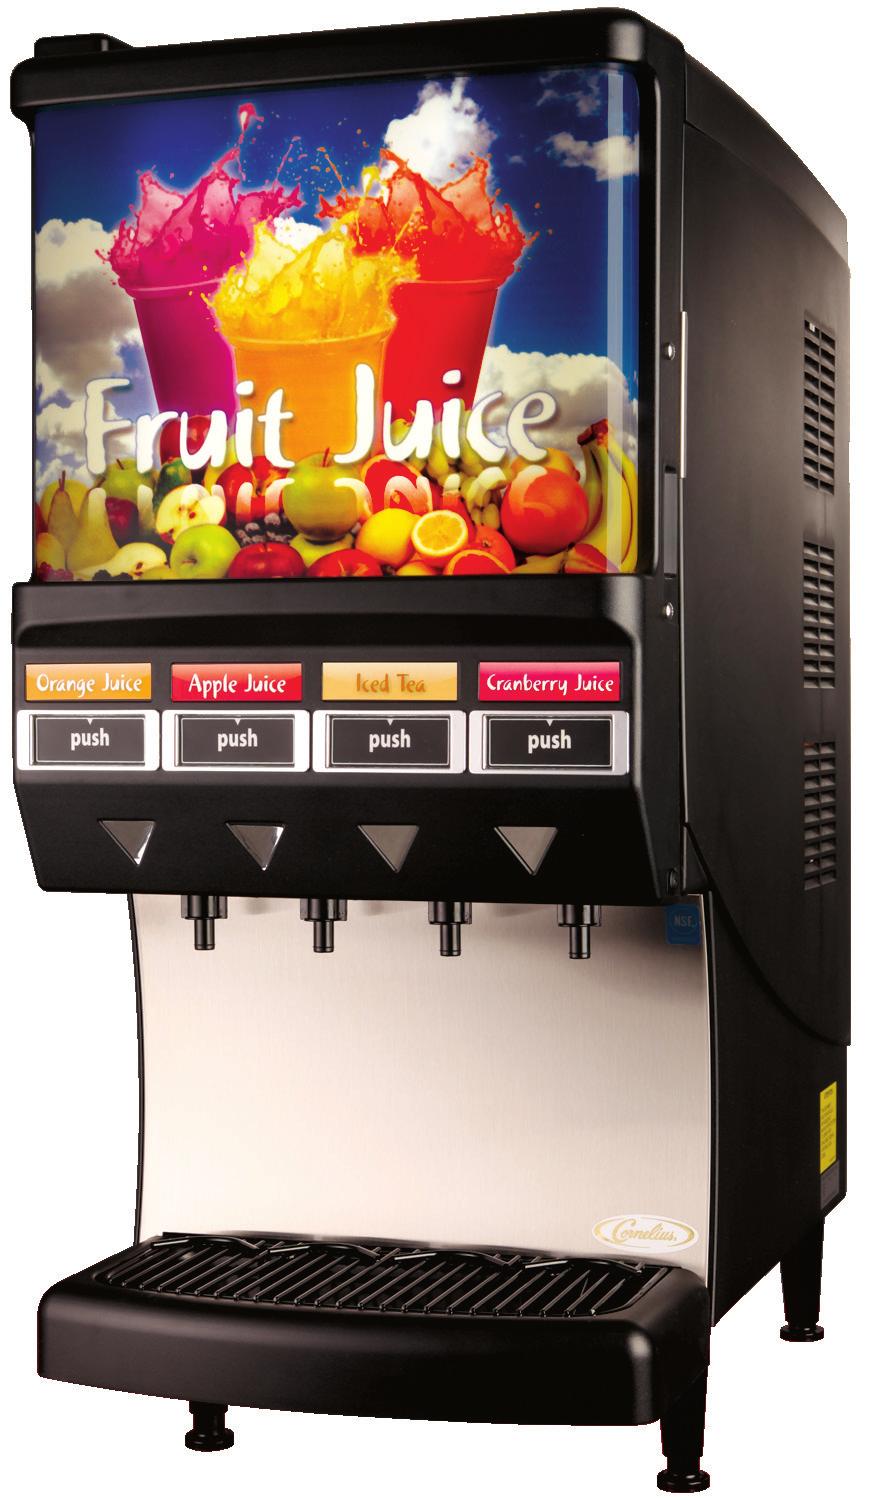 QUEST ELITE 4000 4-FLAVORPOST-MIX JUICE DISPENSER FEATURES Wide product/ratio capability Handles a wide range of post-mix products including juices with pulp, teas and cold coffees Frost-free